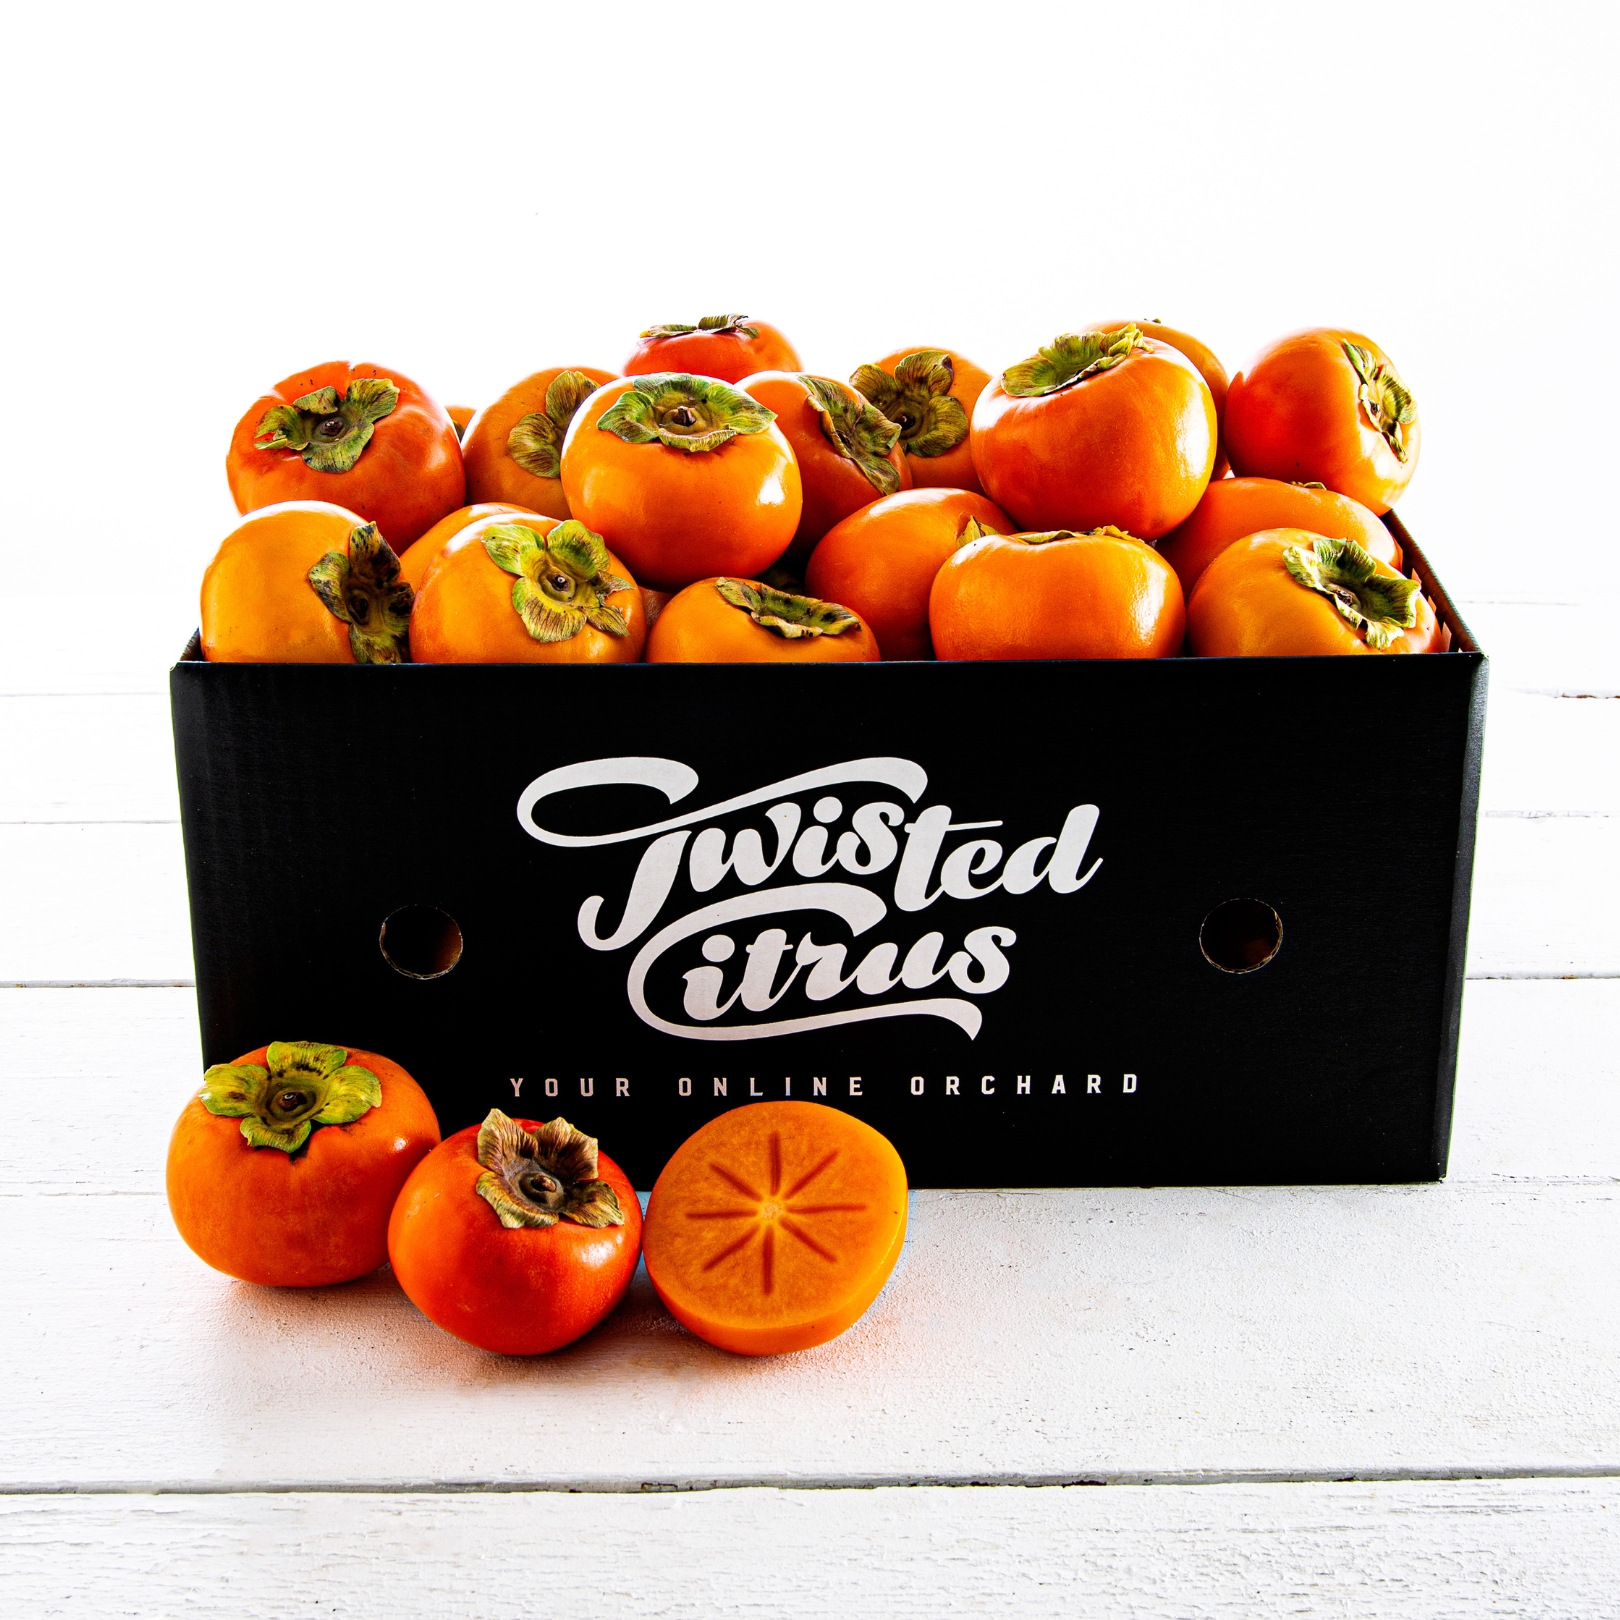 Persimmon fruit box delivery nz